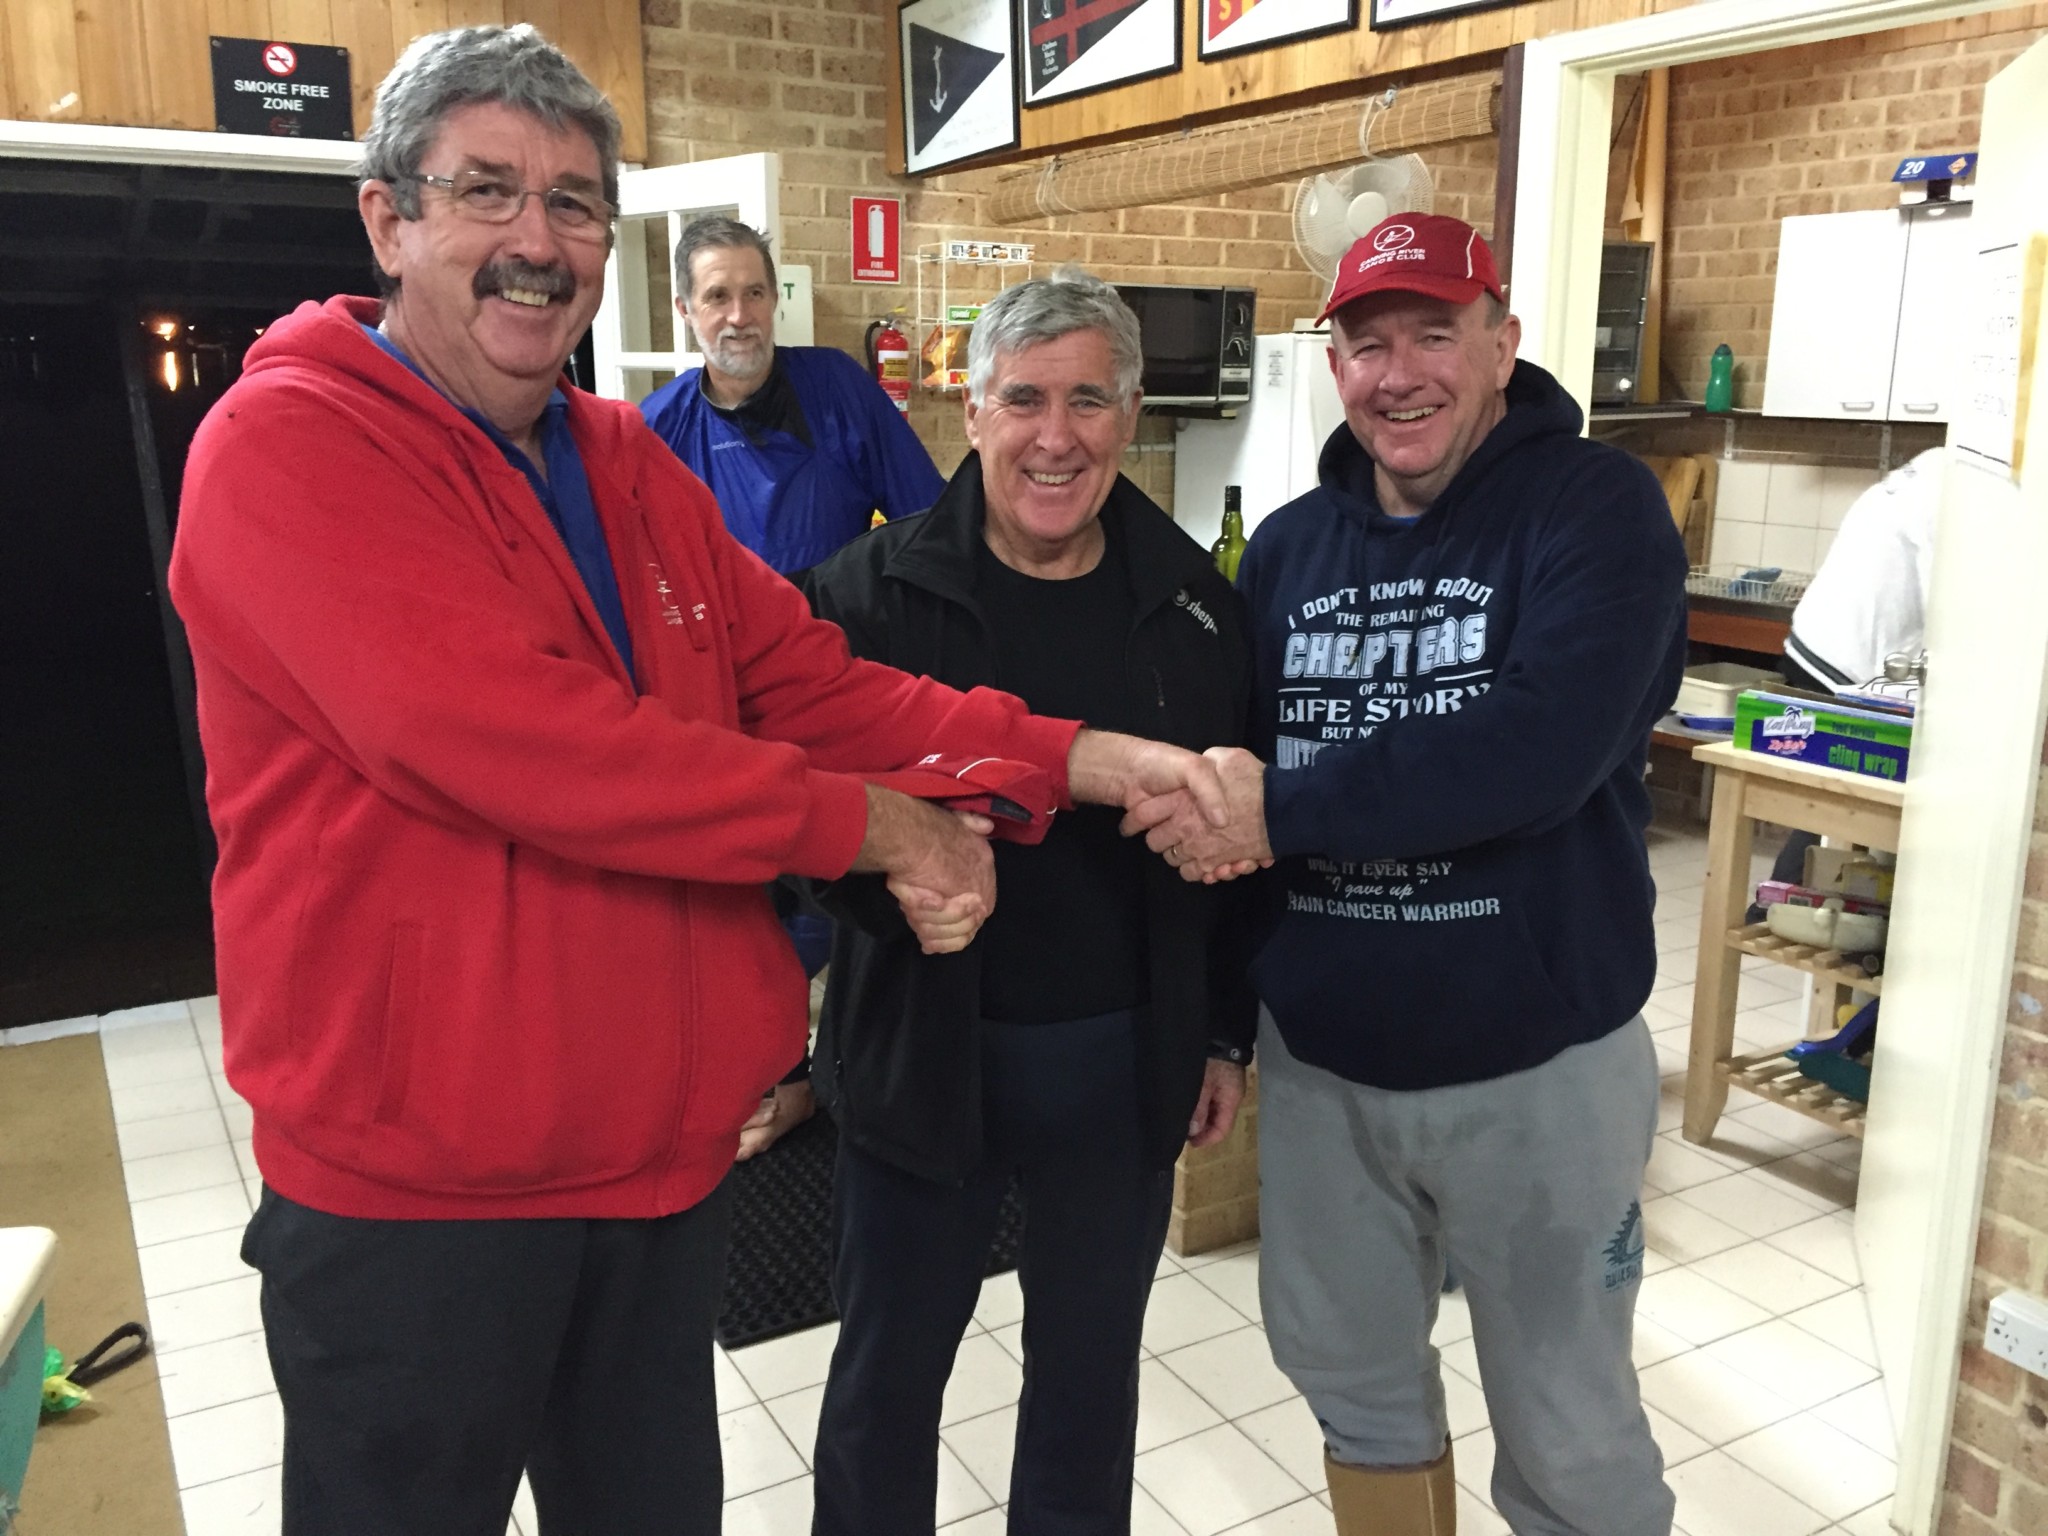 Tues 9th August 2016 : Tonight's photo shows club member Dave Griffiths presenting Joe Wilson and Steve Mitchinson with movie vouchers.